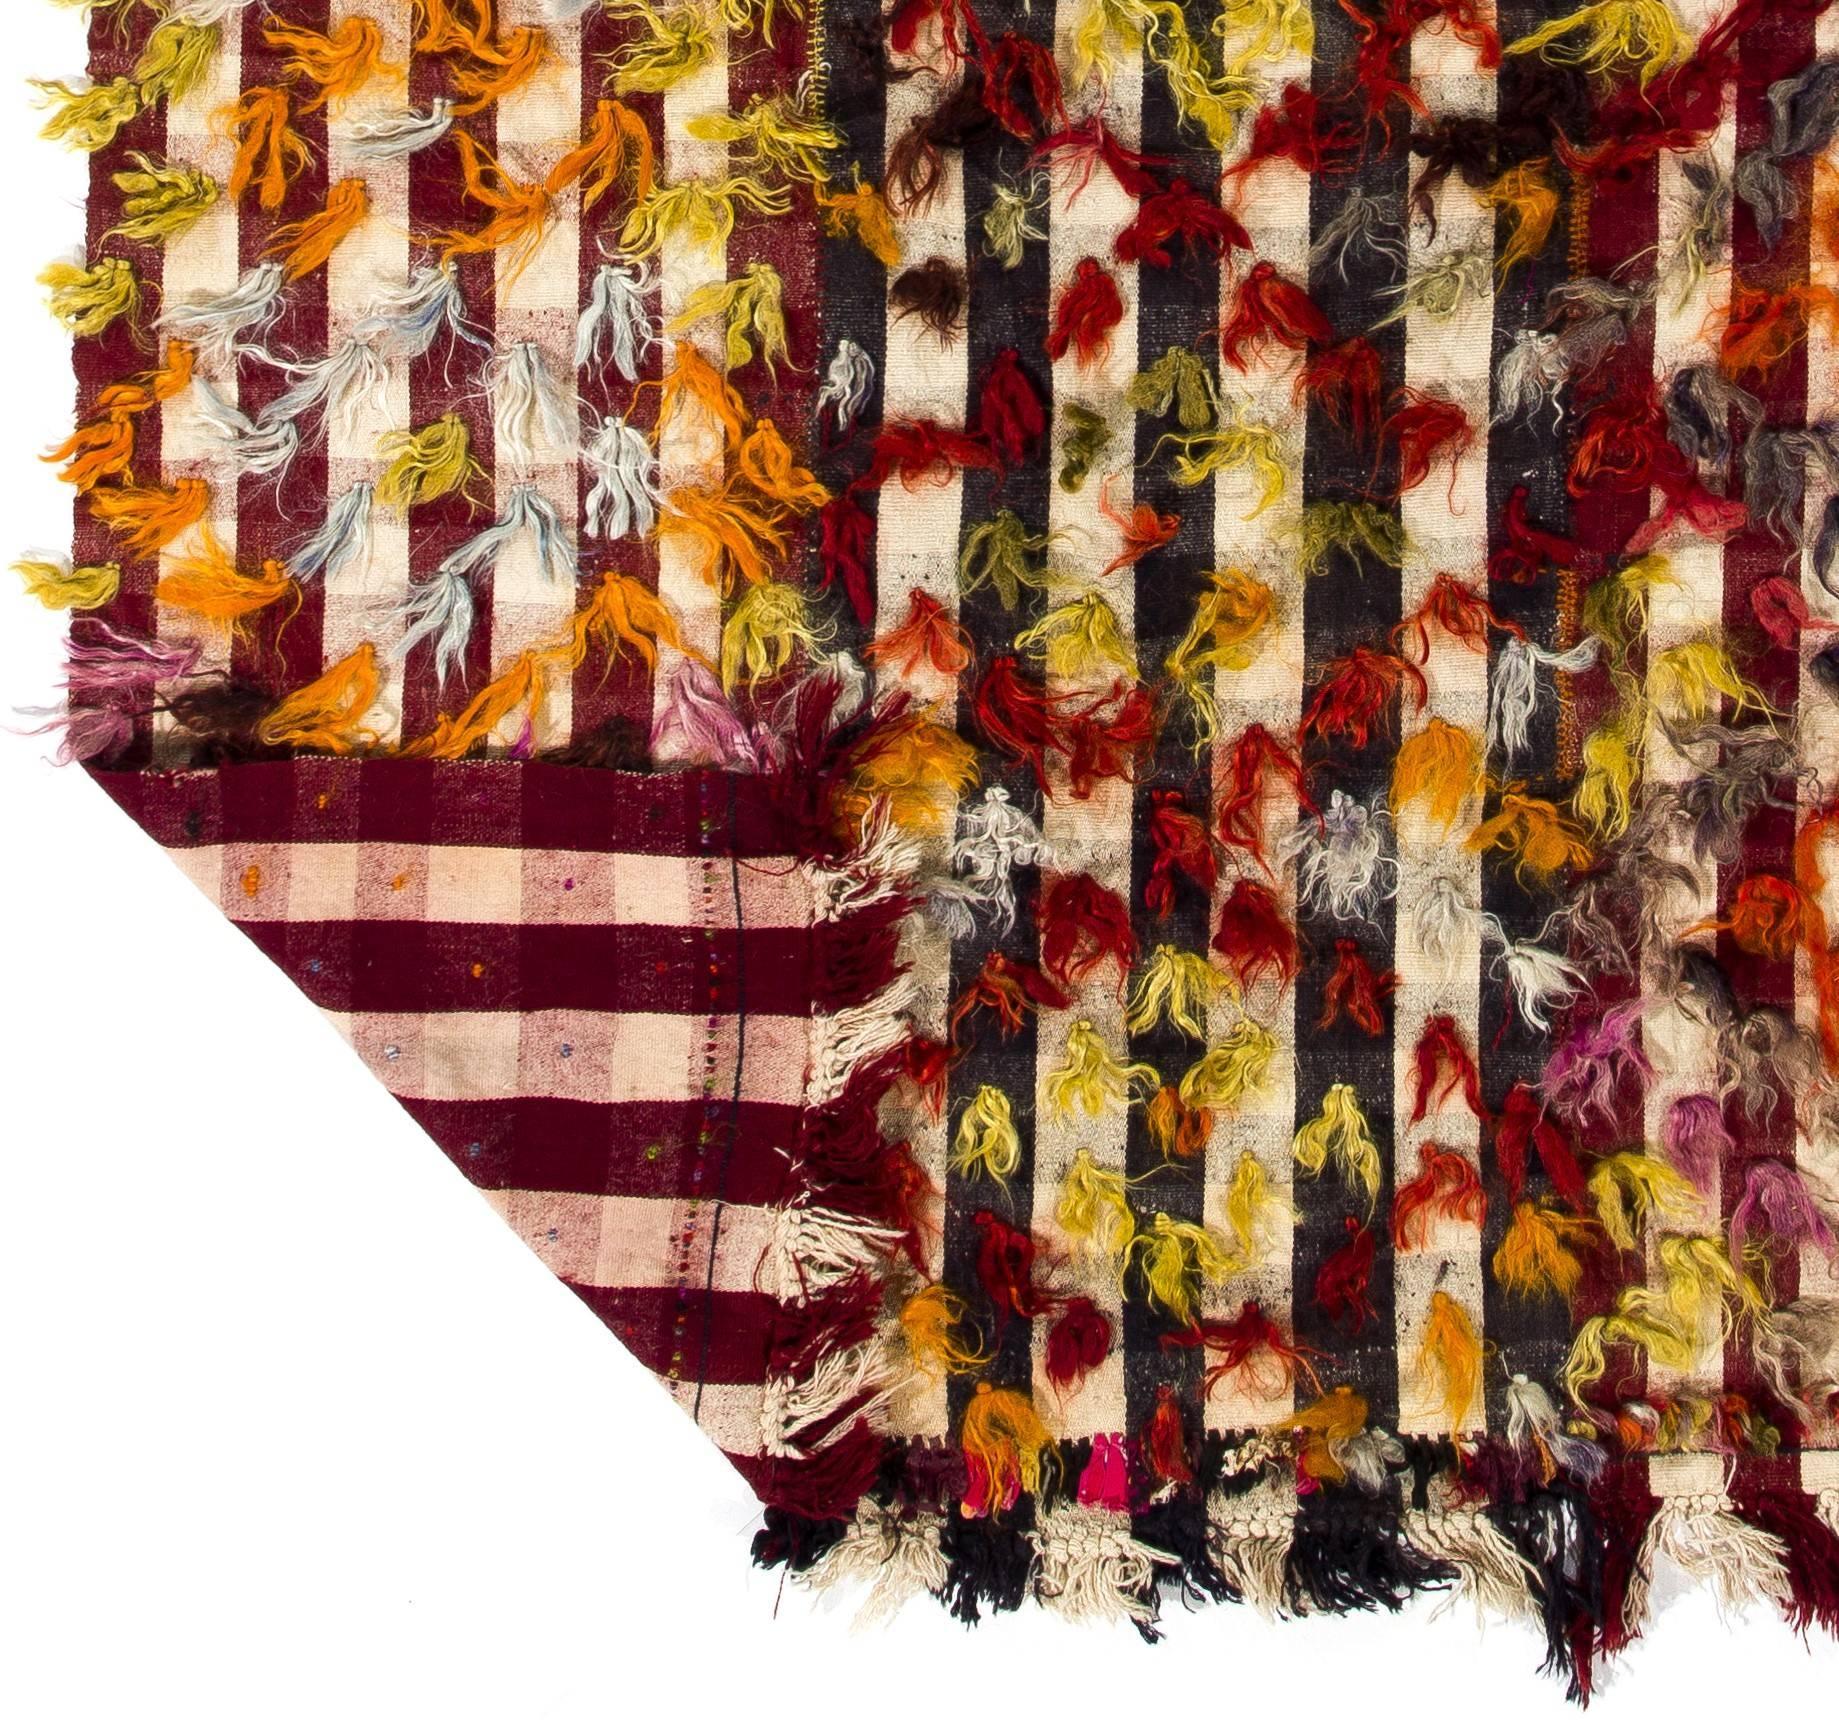 Bohemian 4.7x9.2 Ft Vintage Handmade Kilim Rug with Colorful Poms. Floor, Bed, Sofa Cover For Sale